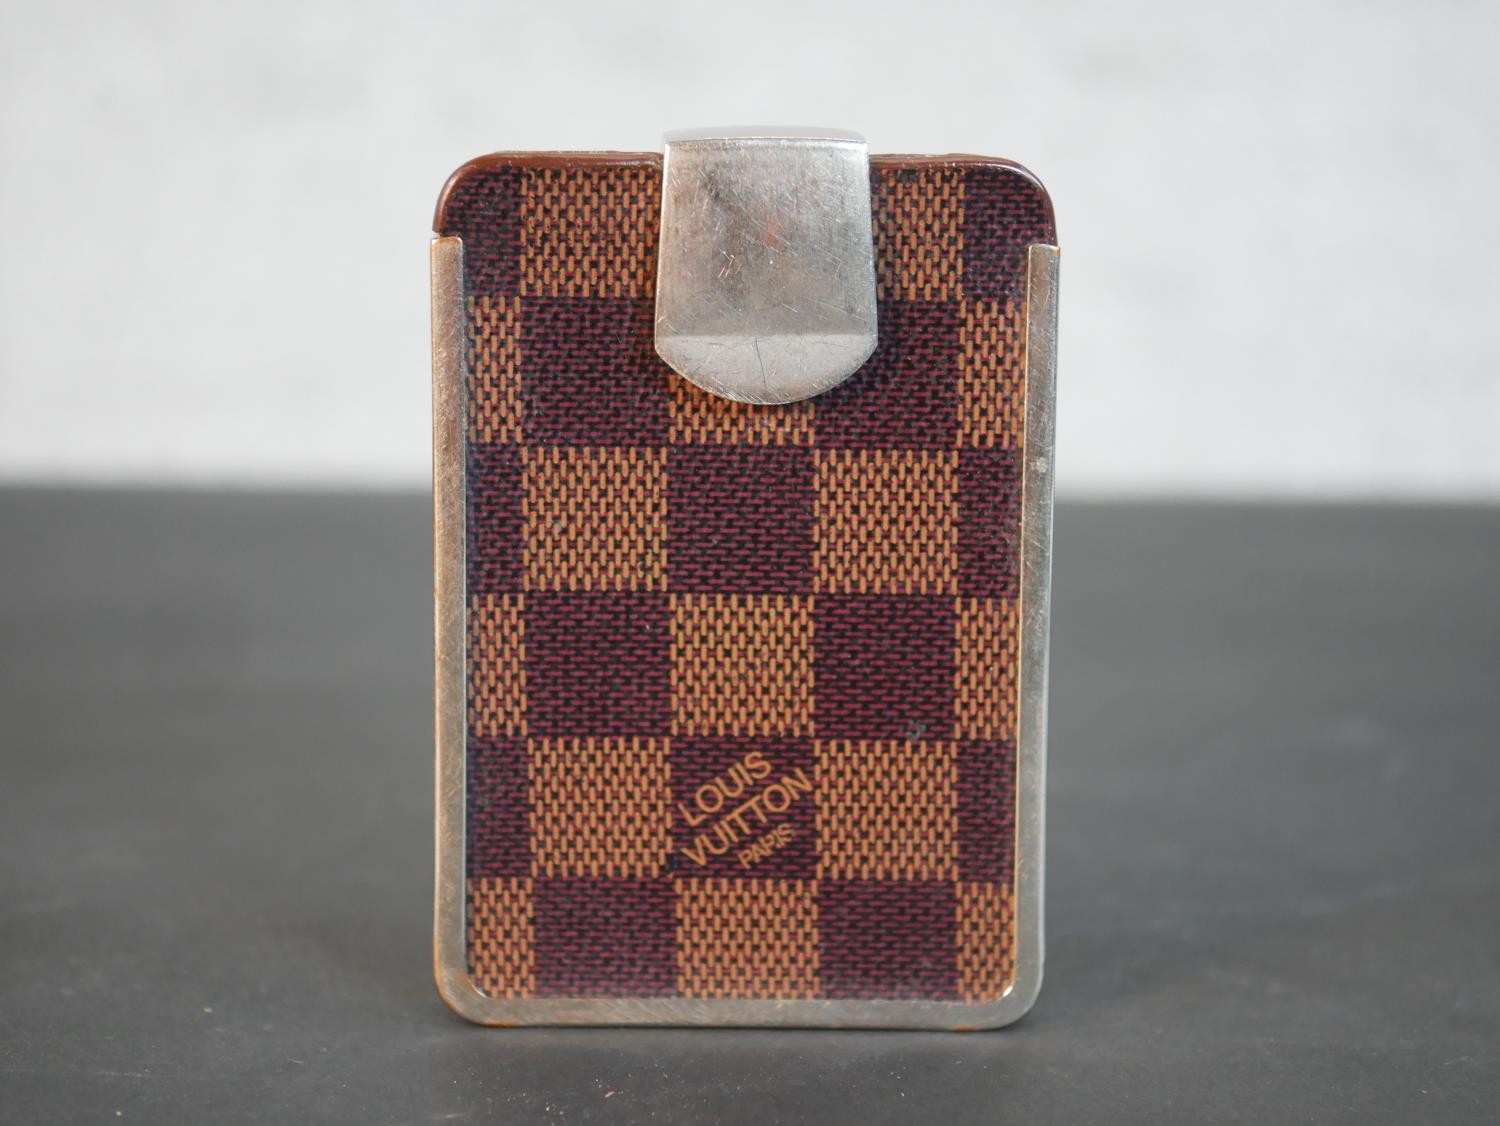 A vintage Louis Vuitton checkerboard design card holder with silver coloured metal hinge clasp and